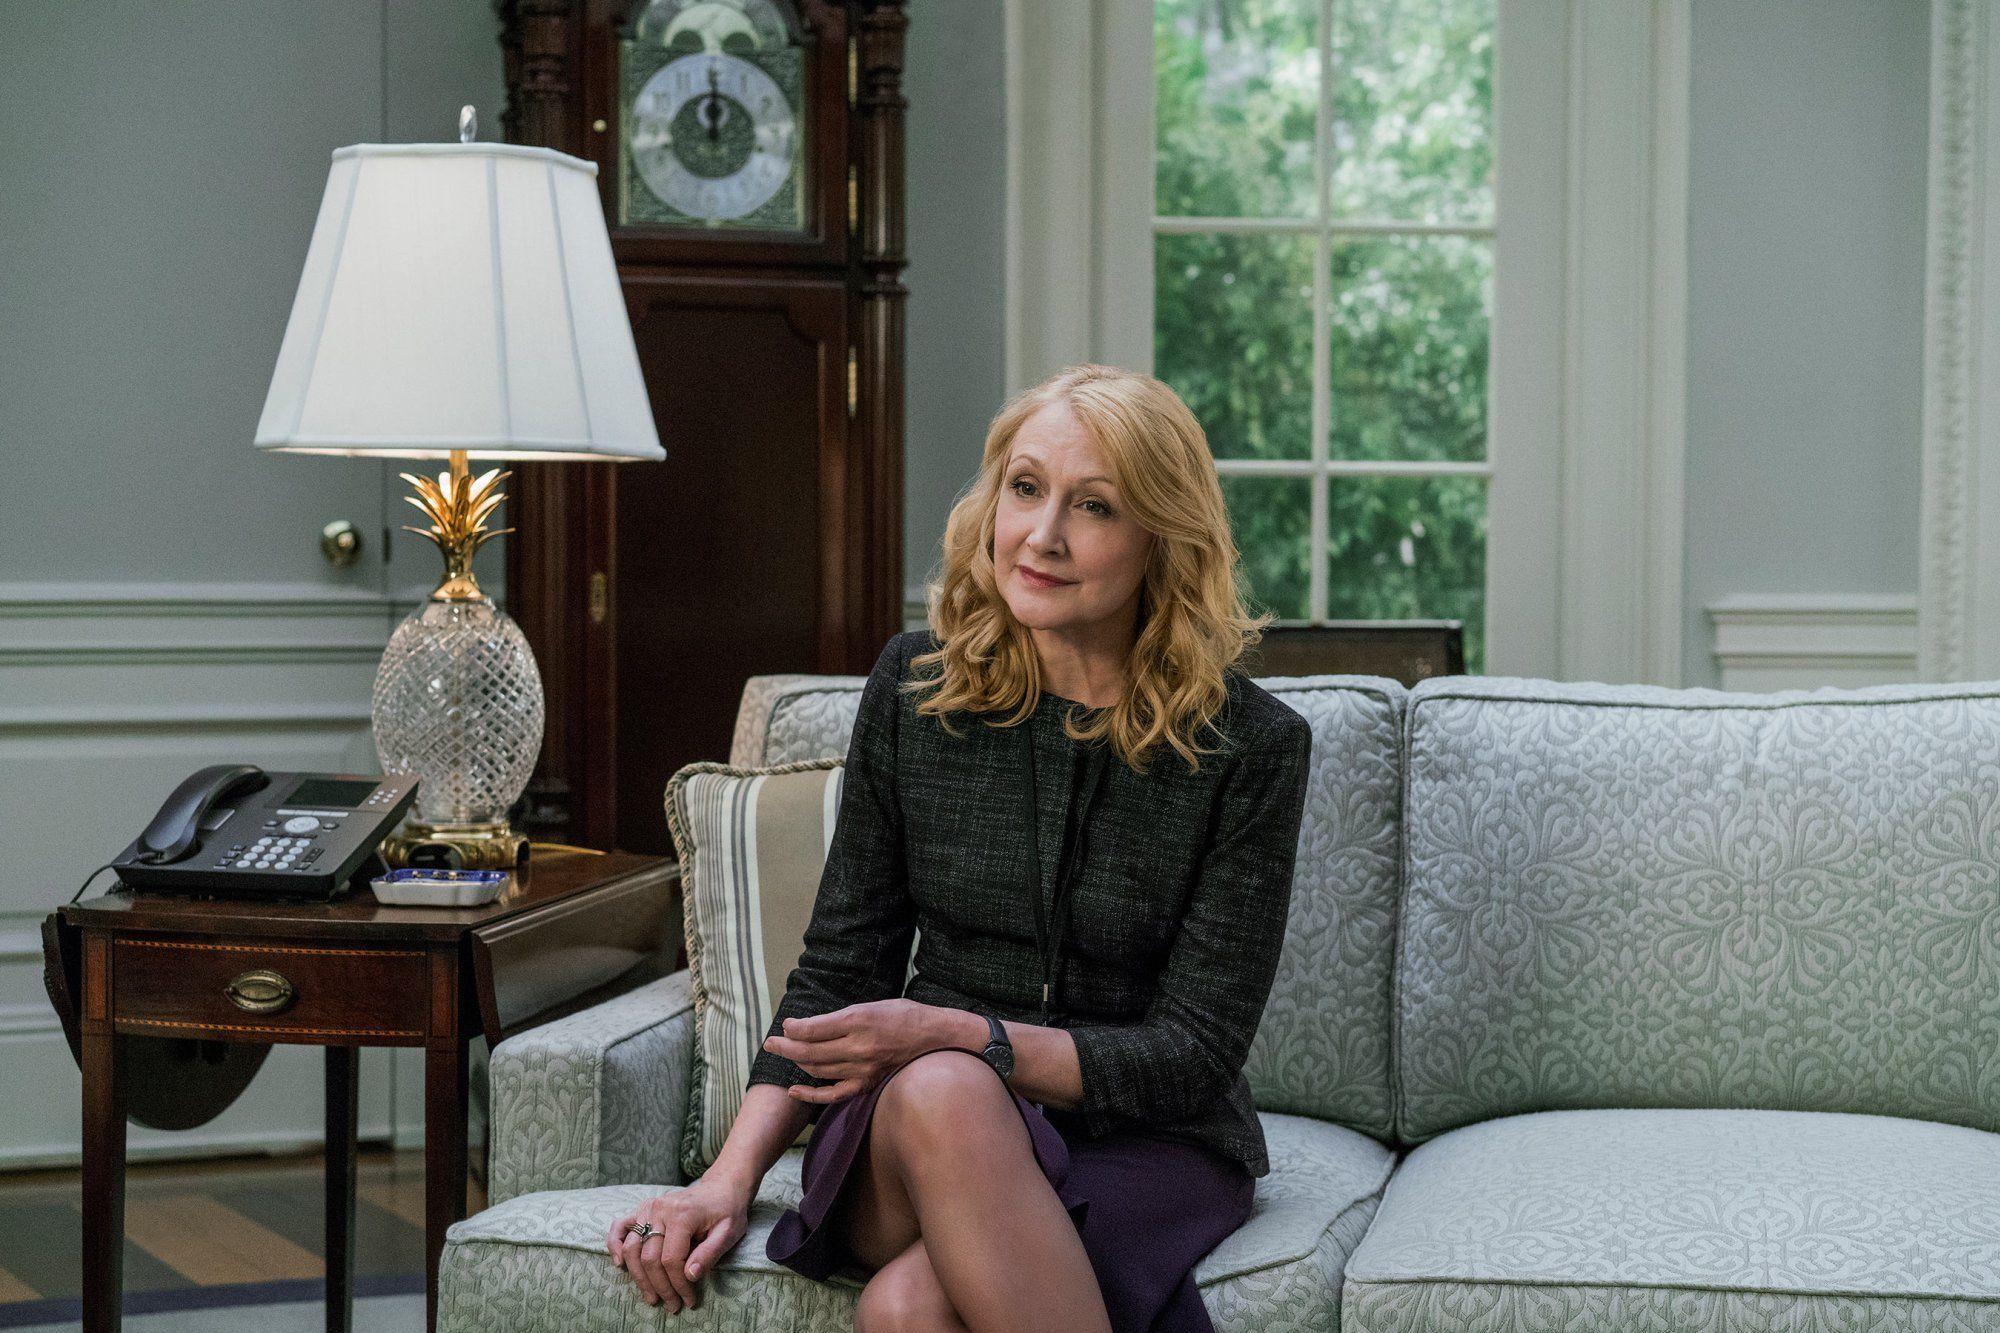 Who Is Jane Davis on House of Cards?